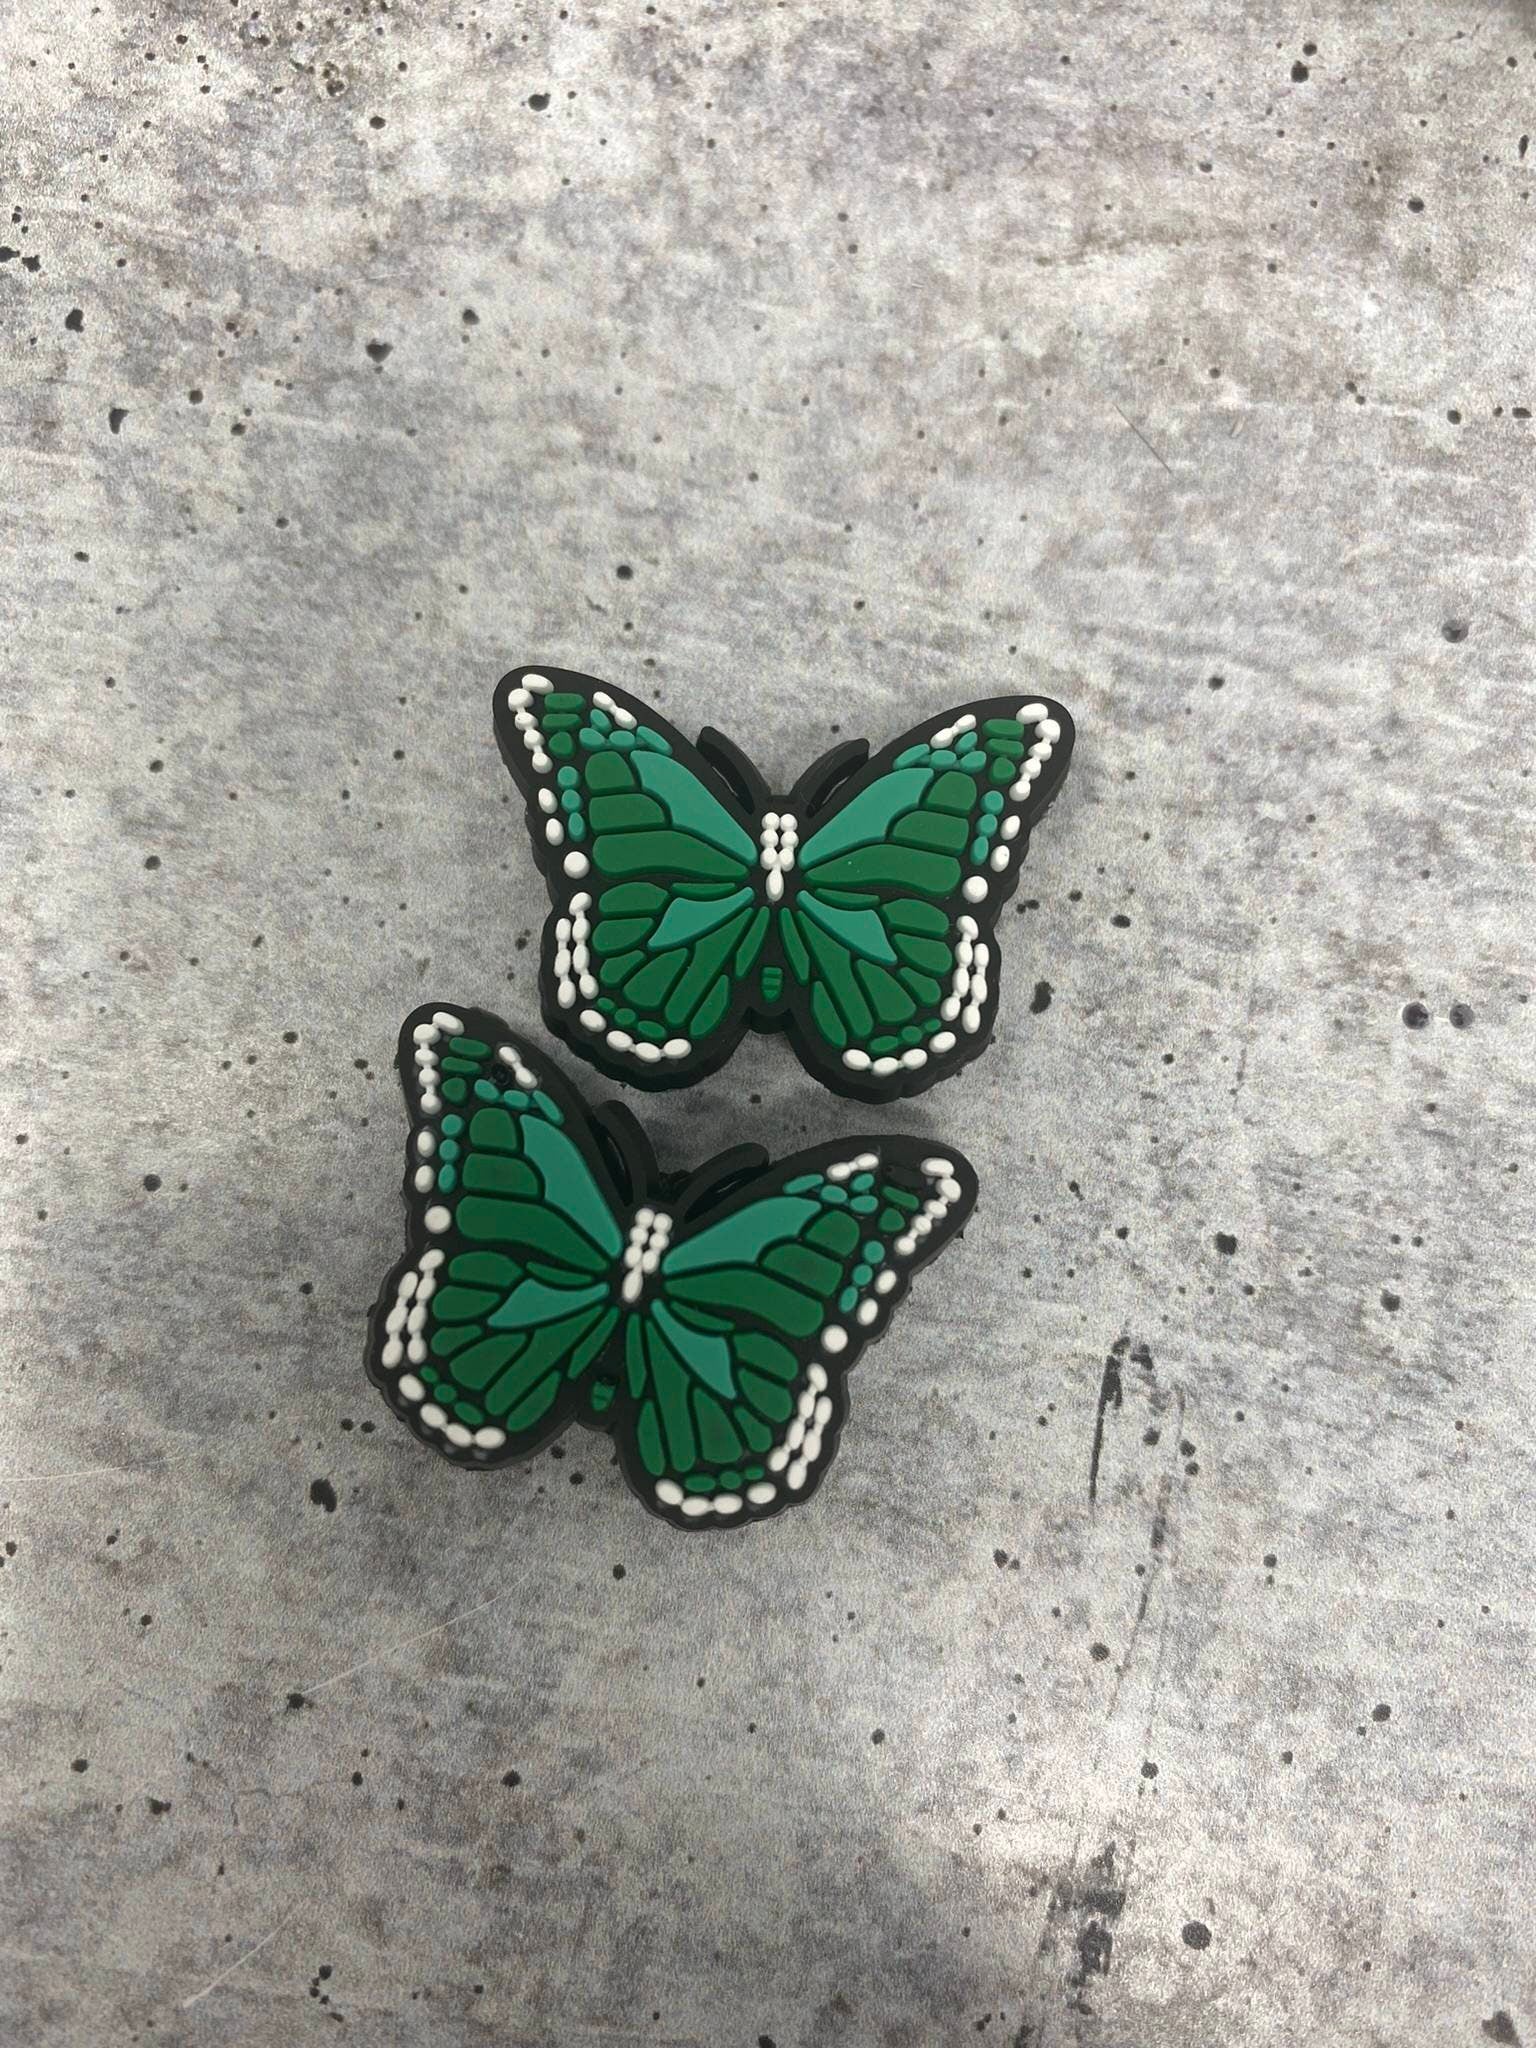 Cute, 1-pc Green "Butterfly" Croc Charm;  Charms for Girls & Nurses; Trendy Rubber Charm for Shoes and Silicone Bracelets, Glam Shoe Decor